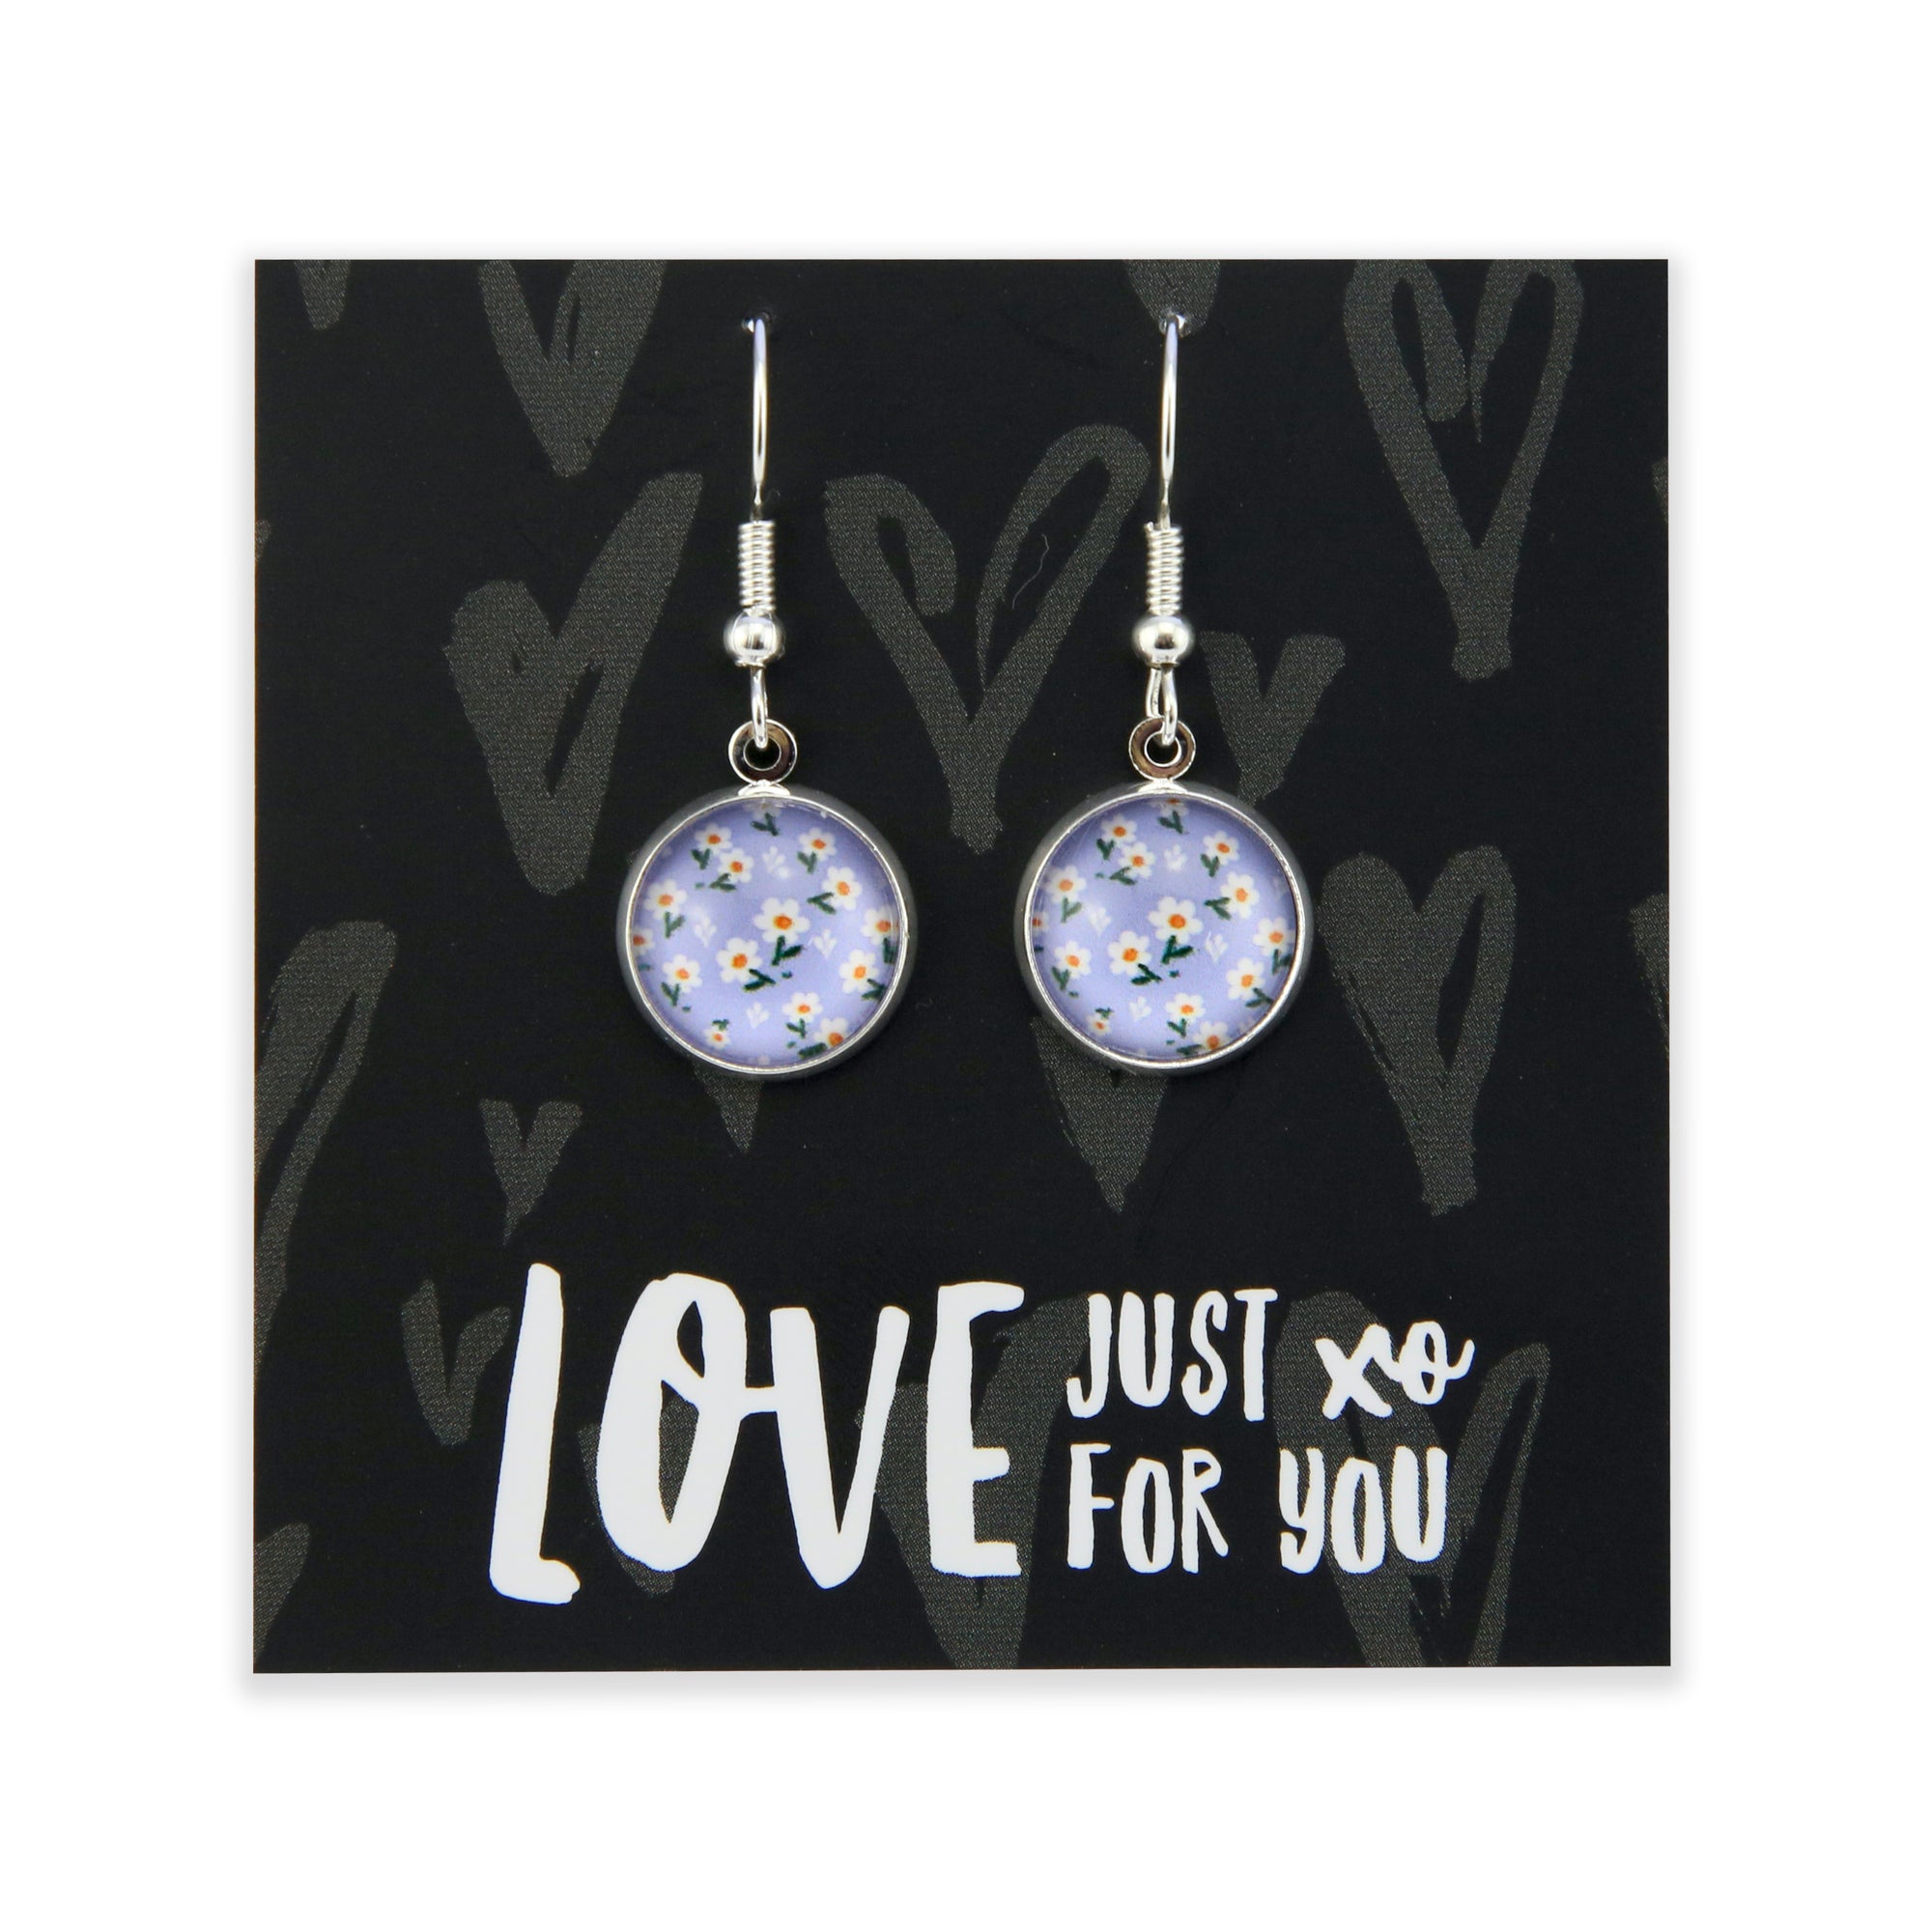 Heart & Soul Collection - Love Just For You - Bright Silver Dangles - Daisy Garden (12744)